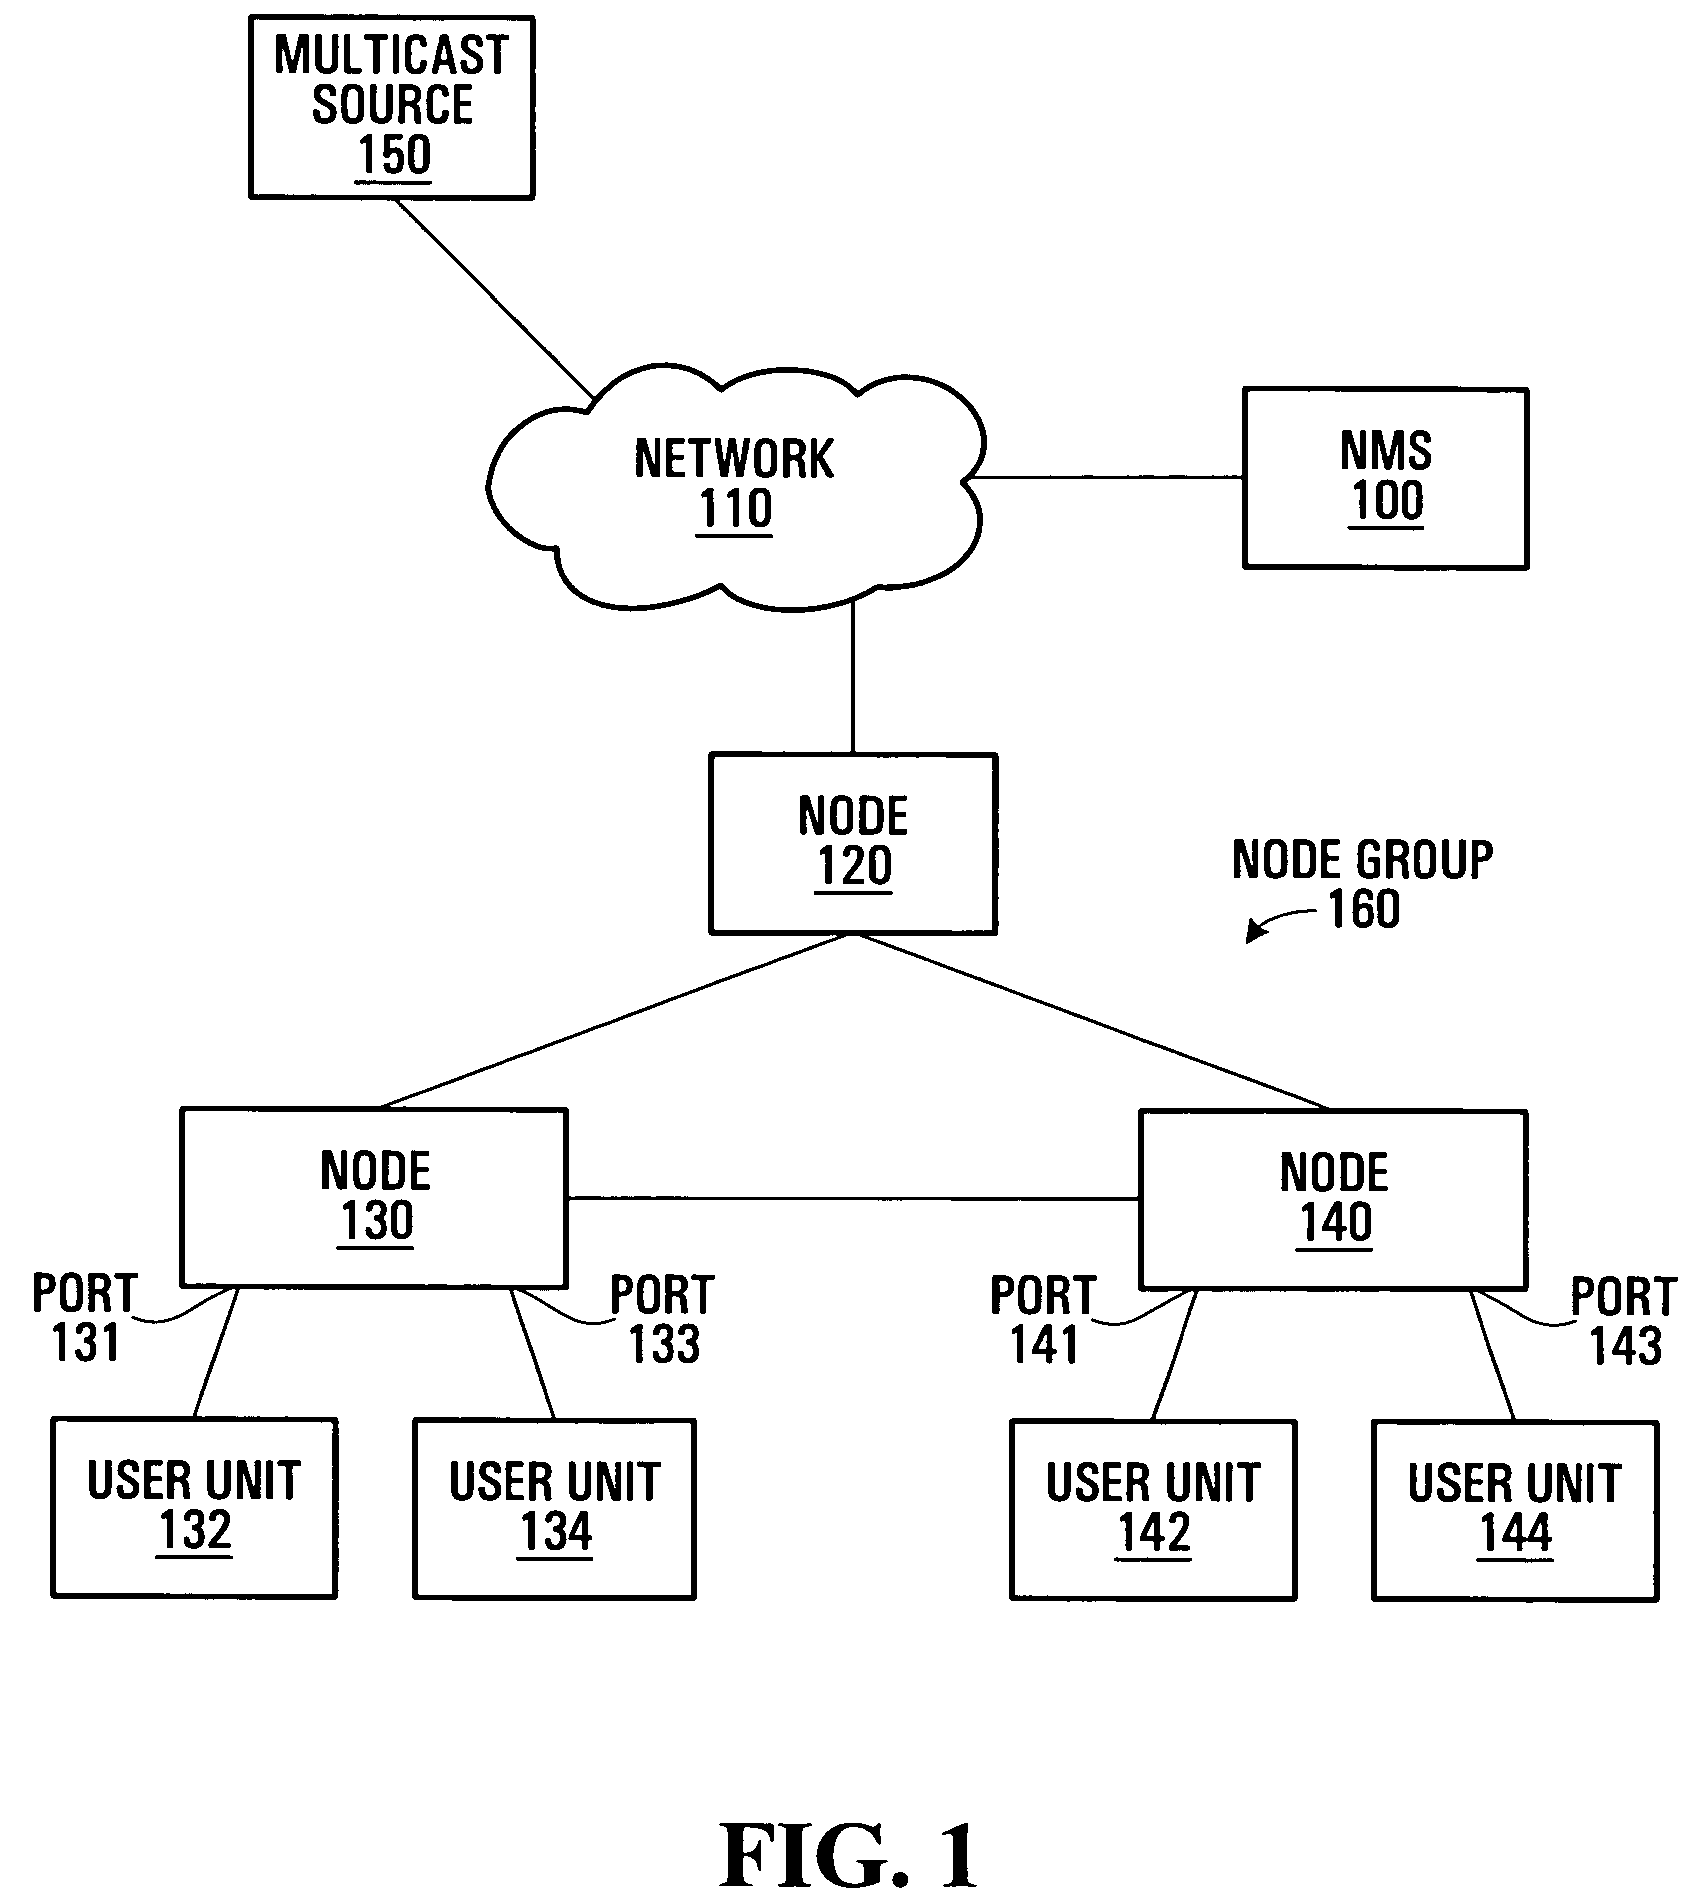 Method and system for managing access to multicast groups